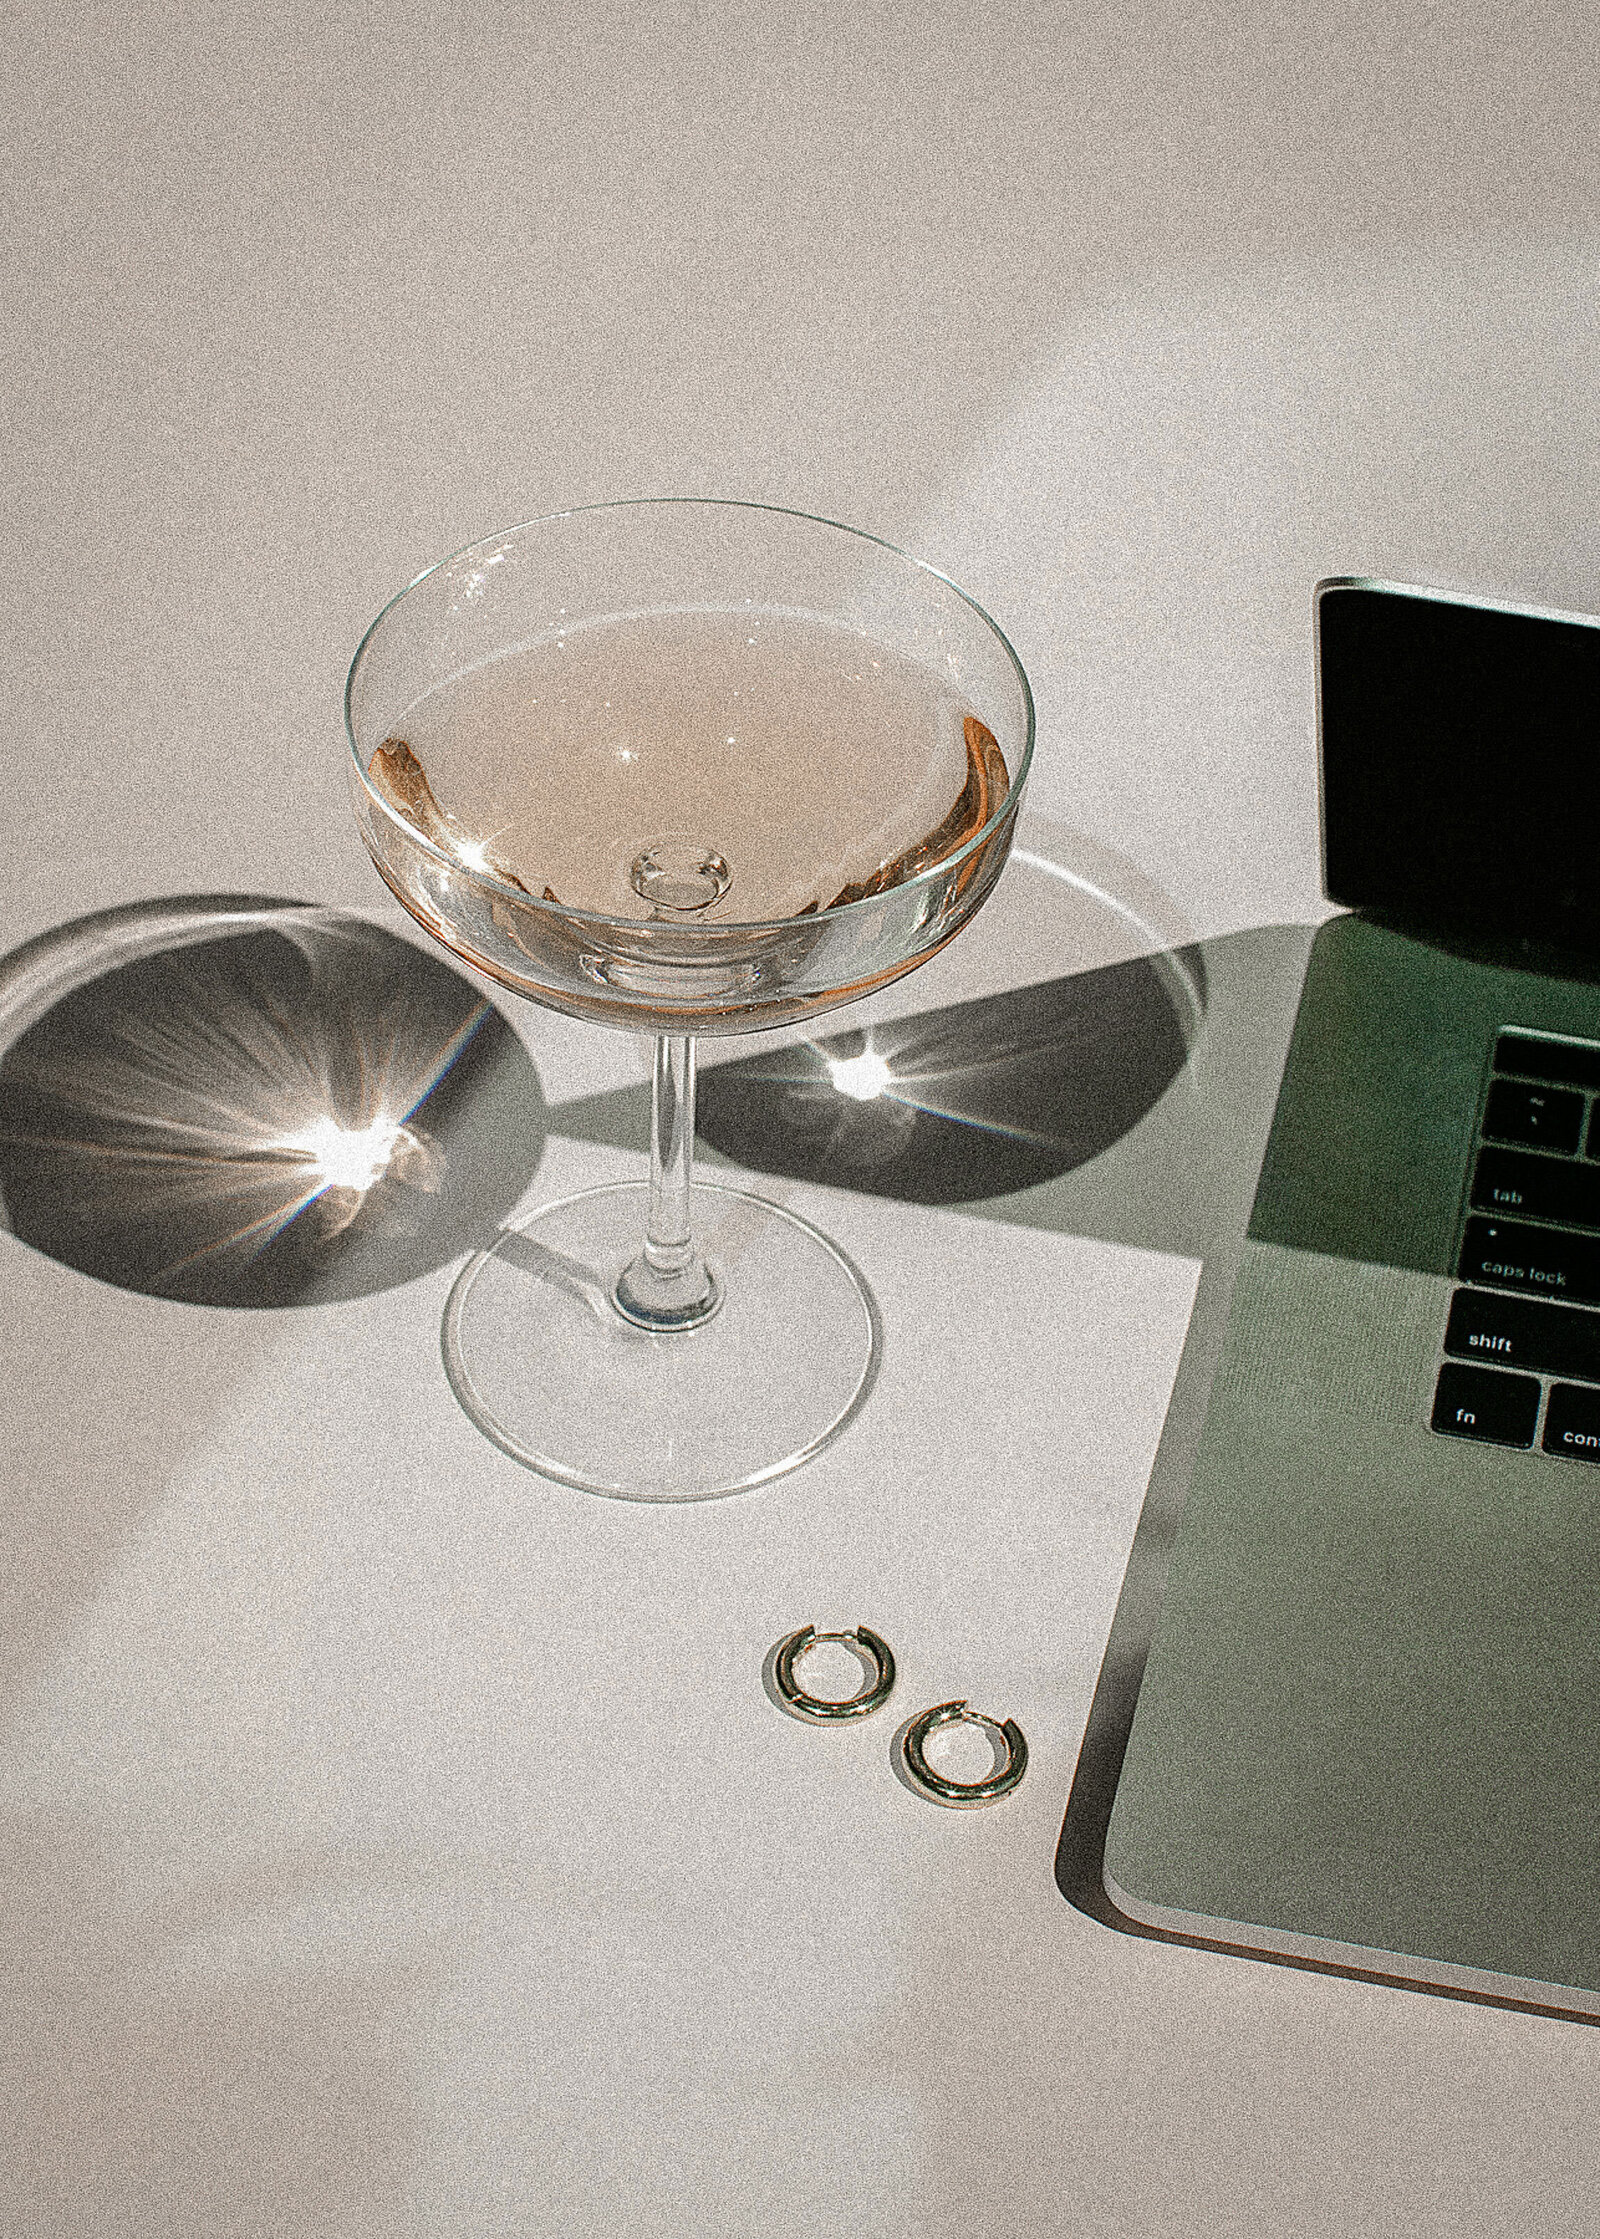 A laptop and Champagne - working woman, business woman